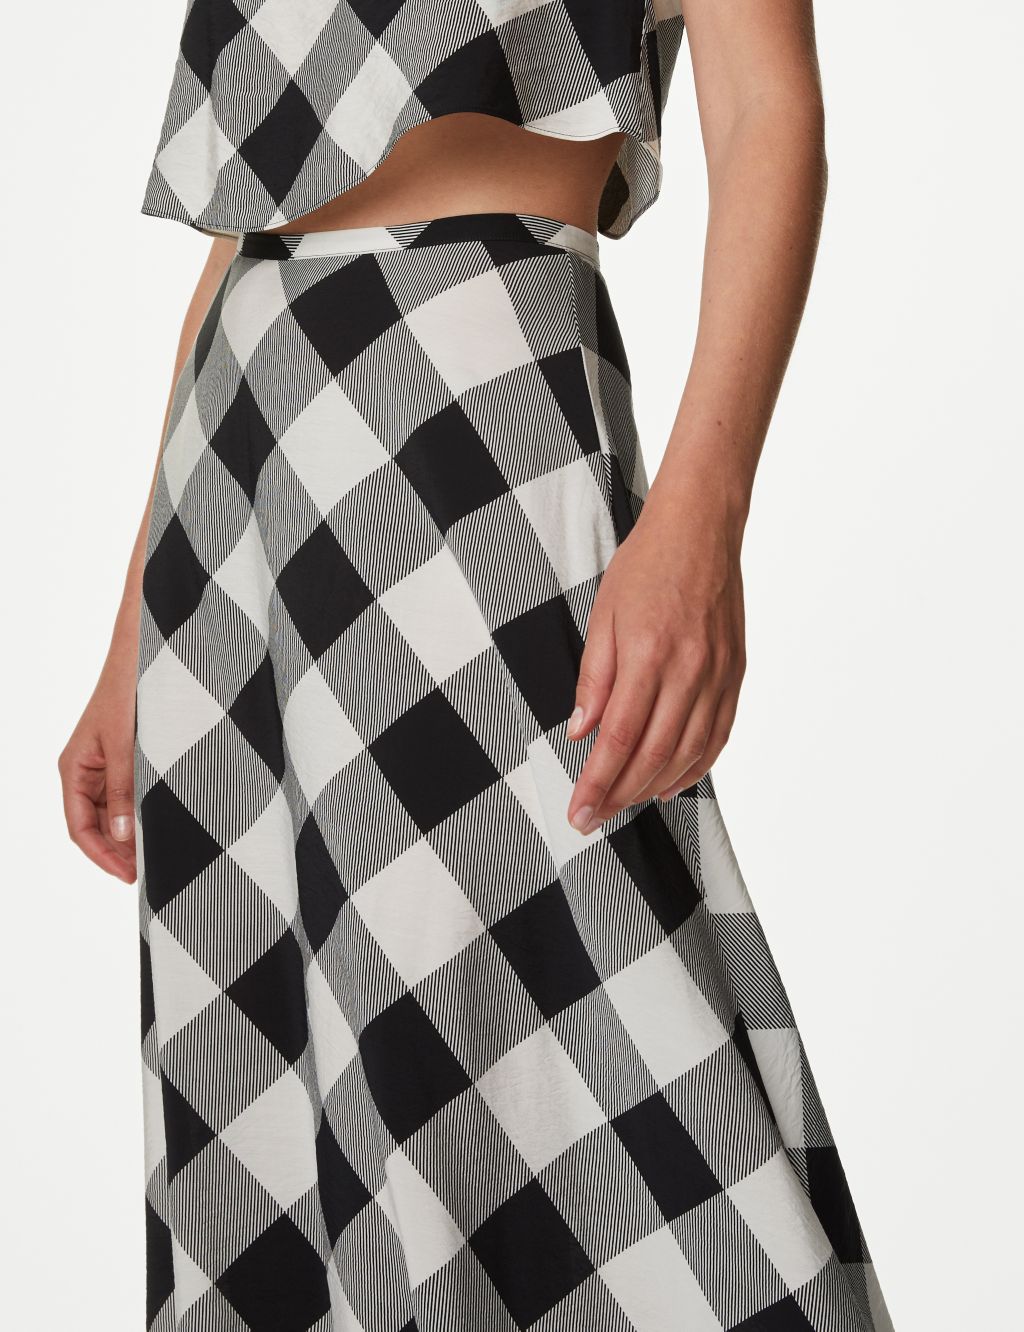 Checked Maxi A-Line Skirt image 4